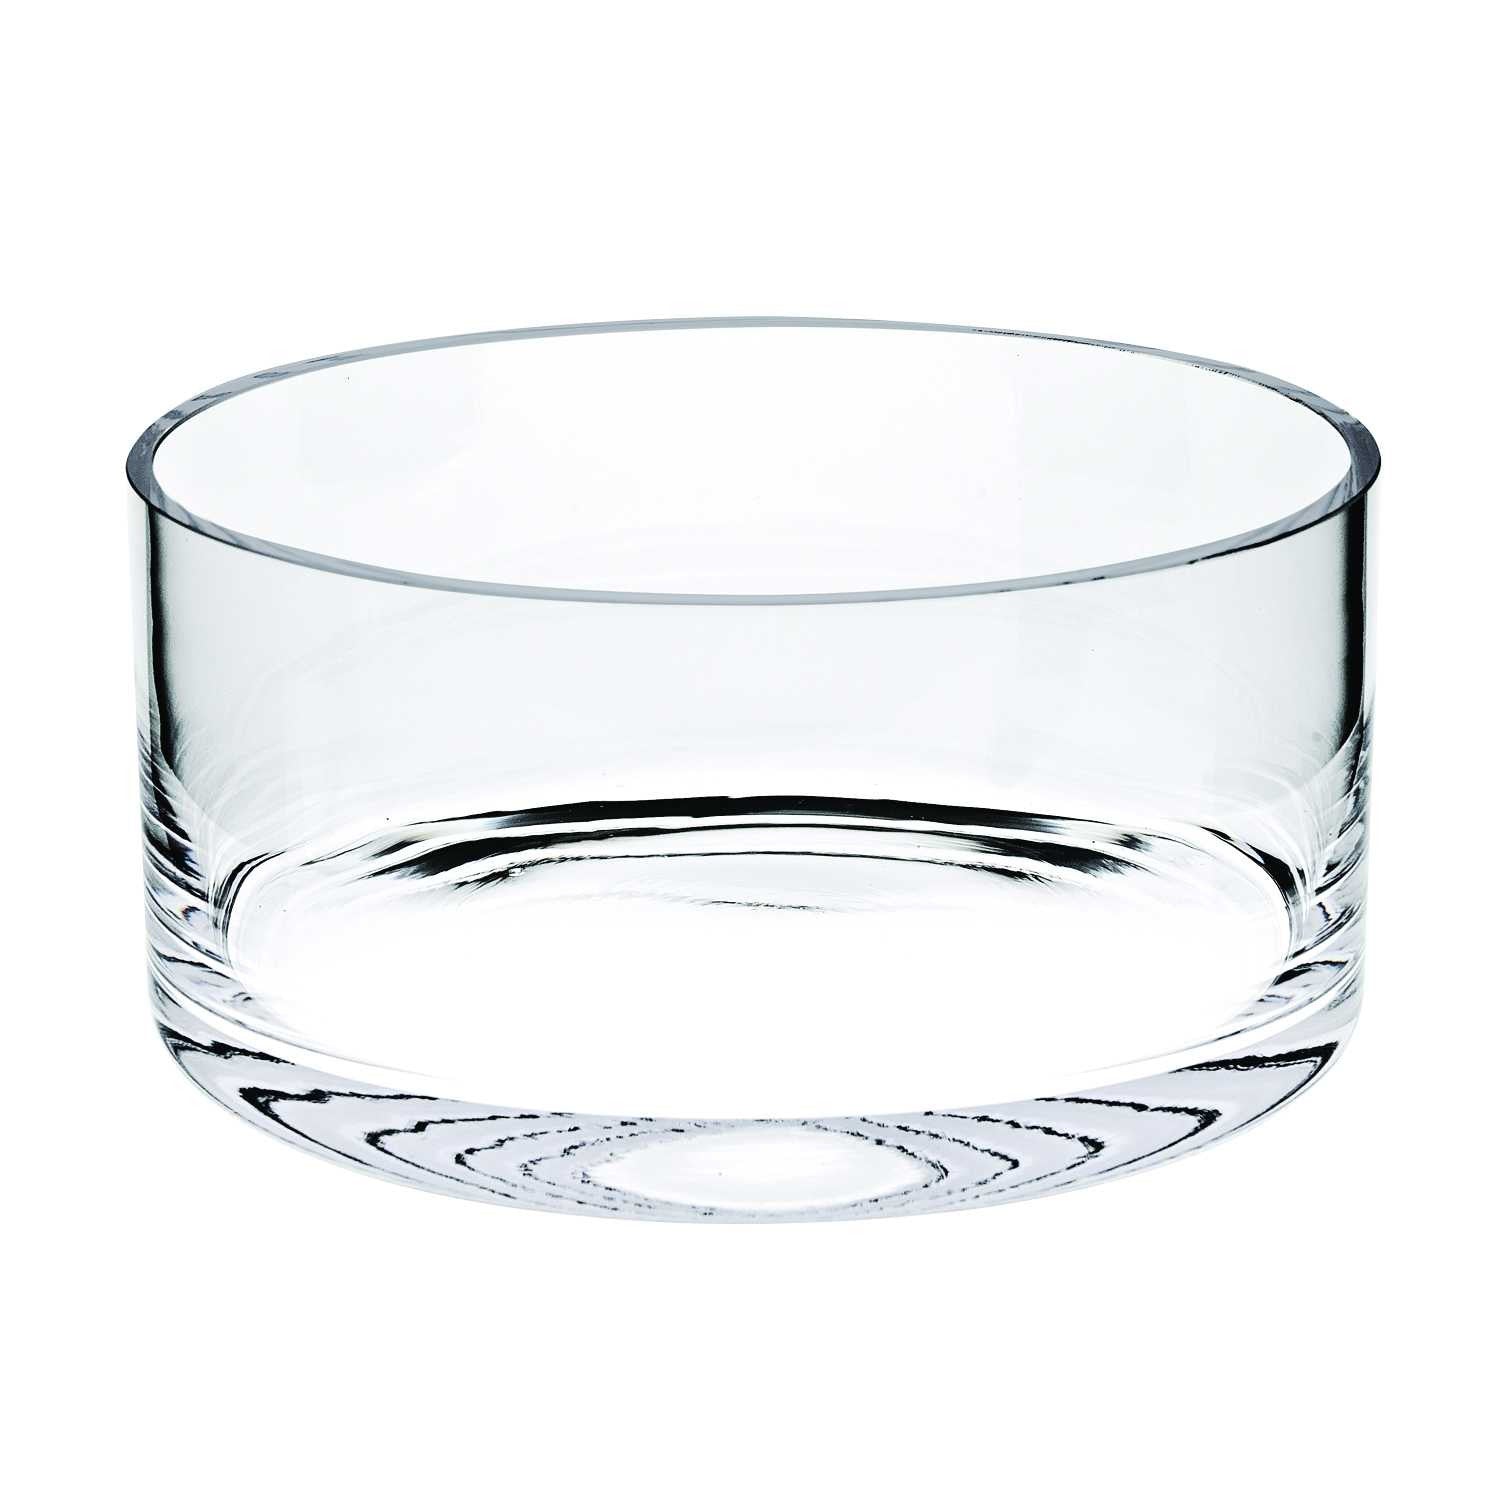 European Glass Straight Sided Salad Bowl - Thick Walls - 8